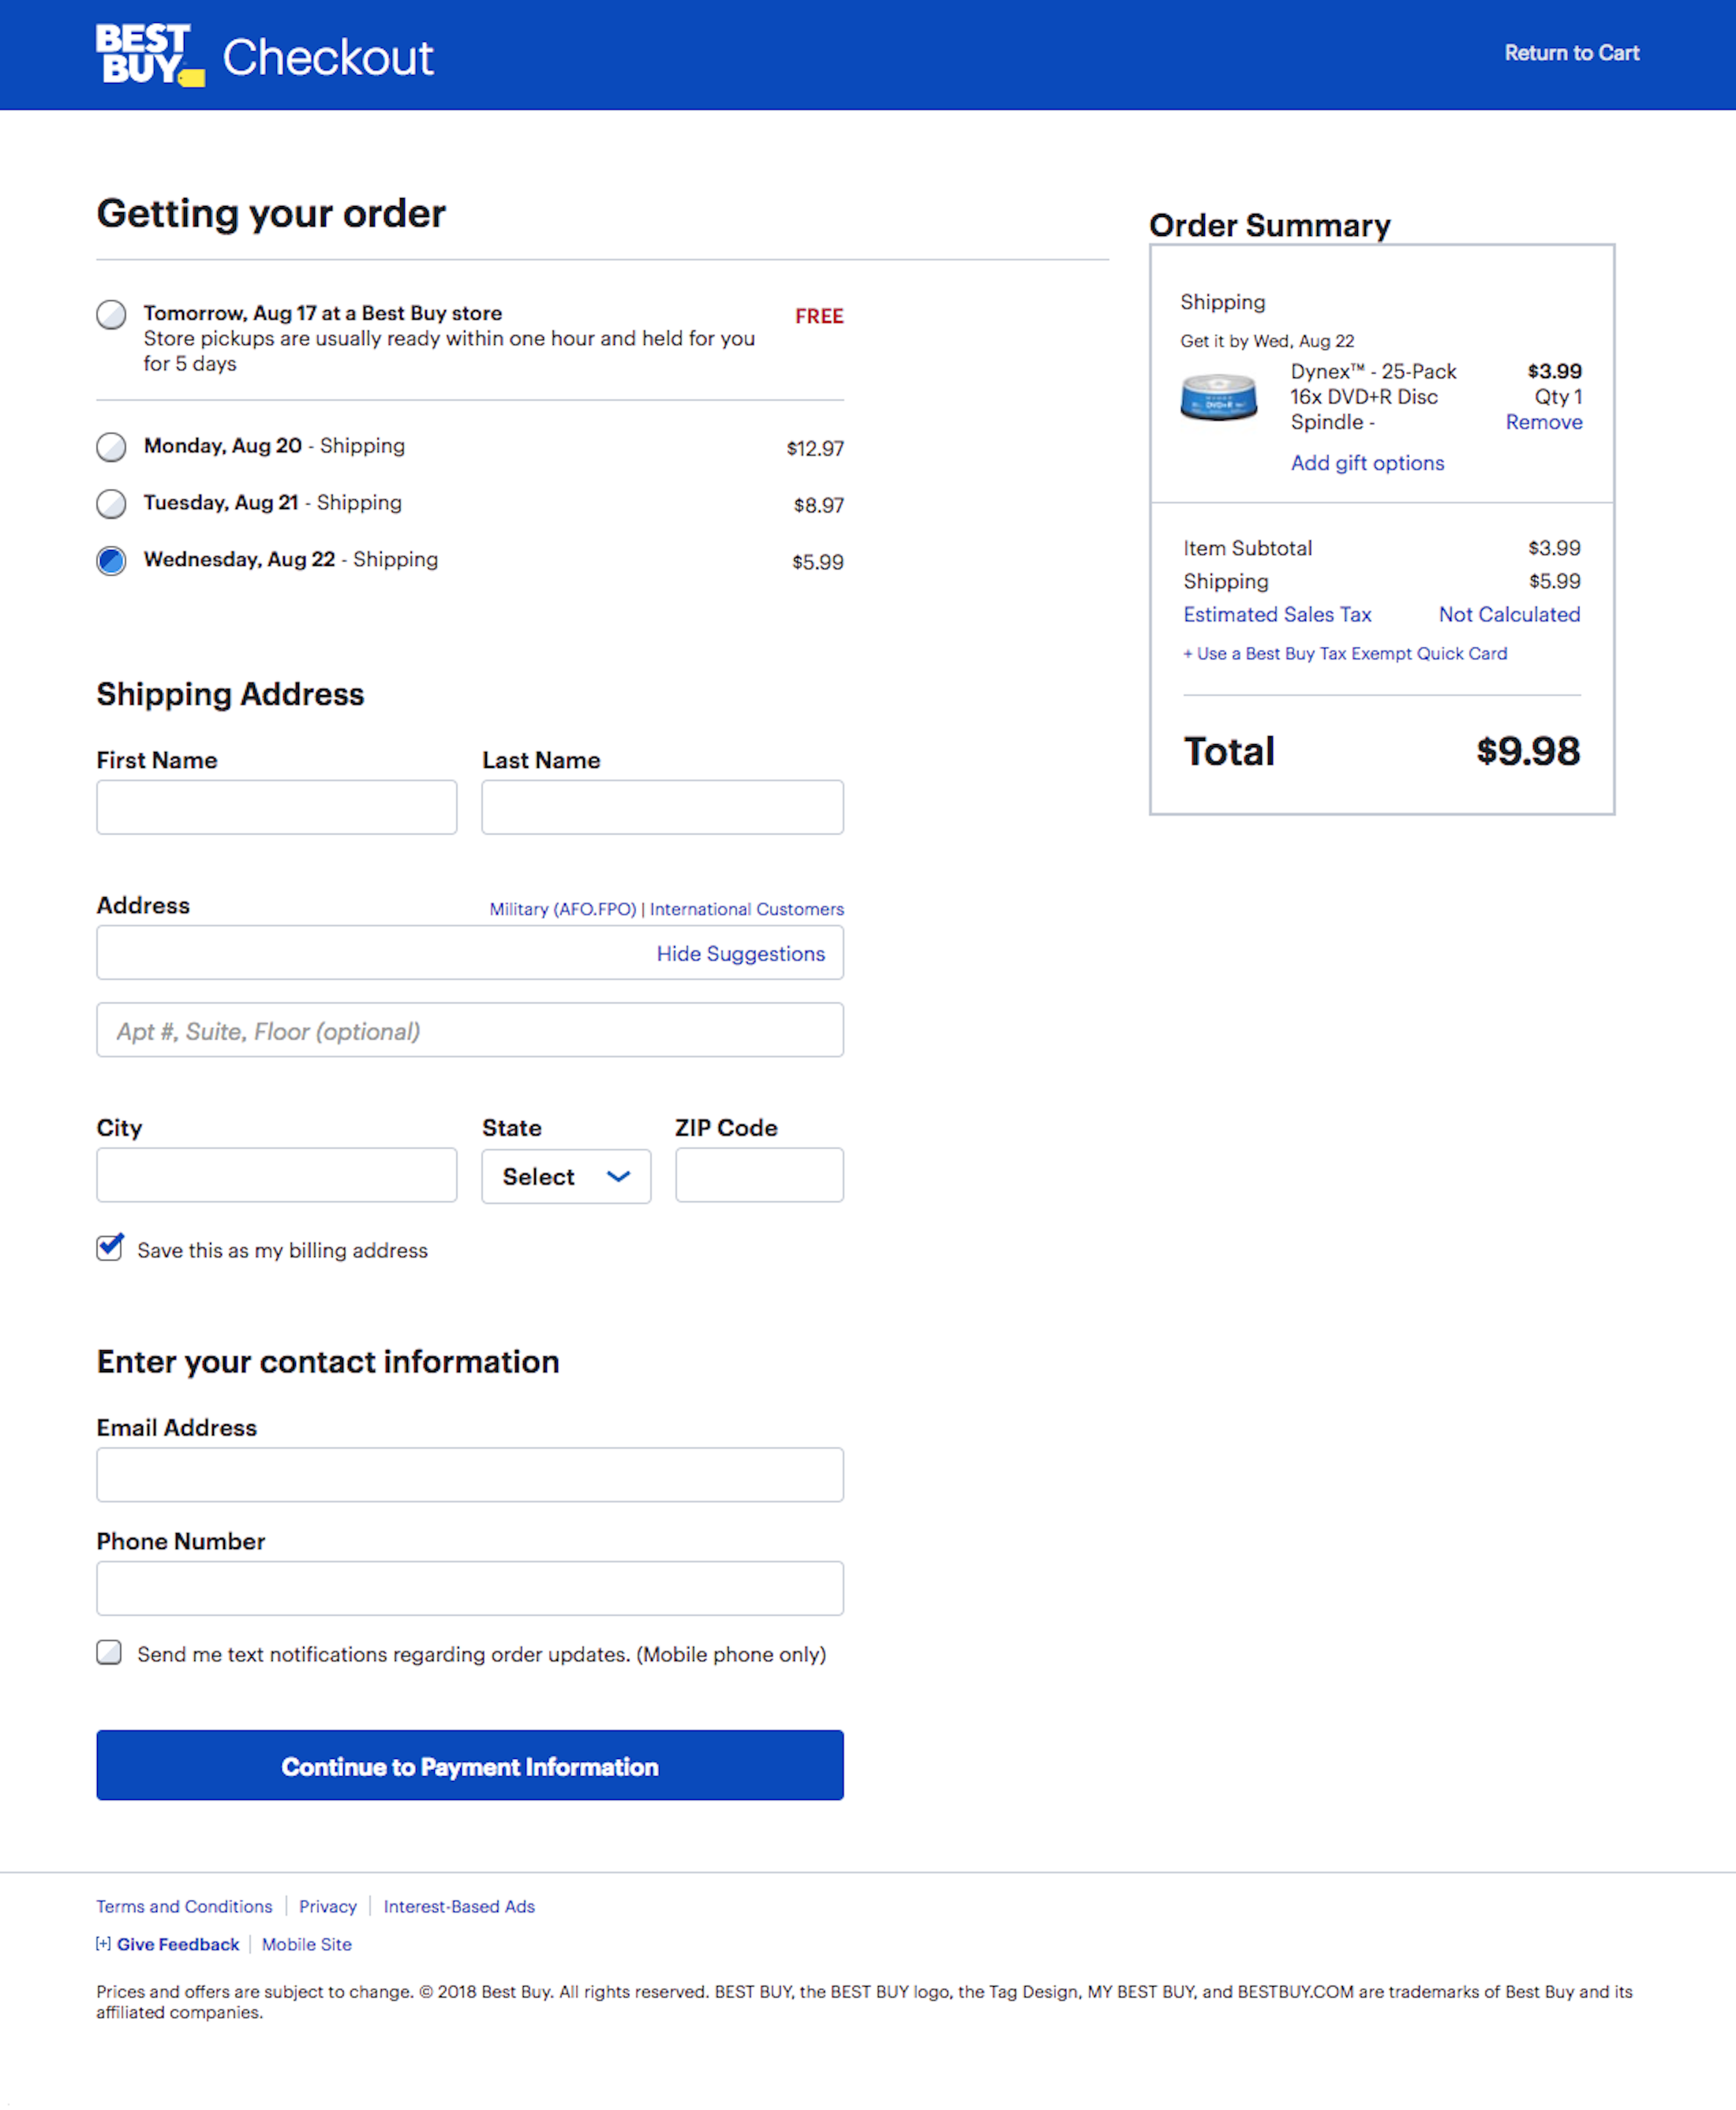 728 'Delivery & Shipping Methods' Design Examples – Baymard Institute